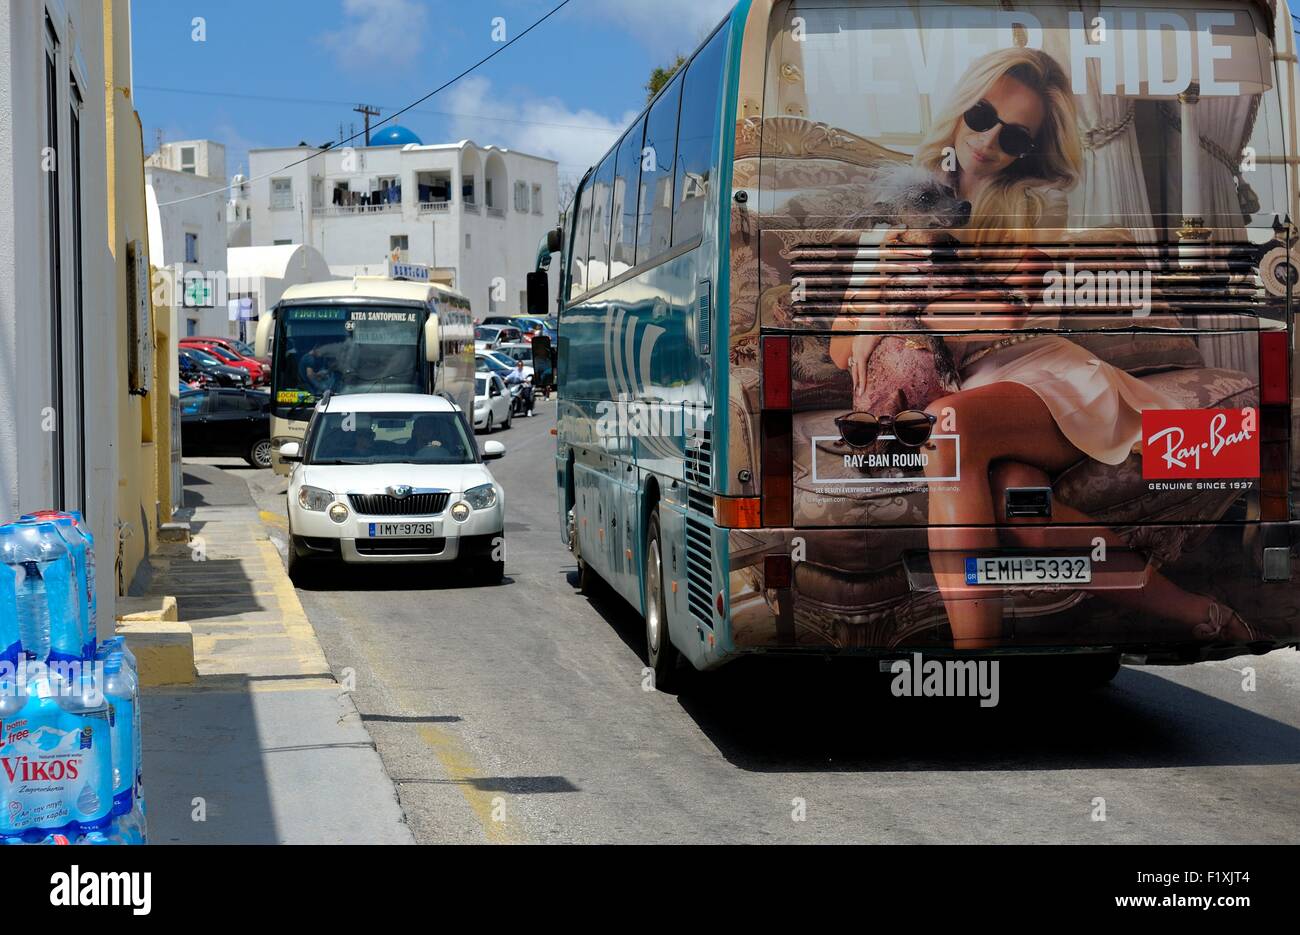 A Ray ban sunglasses advertisement on the back of a tourist coach on the  island of Santorini Greece Stock Photo - Alamy